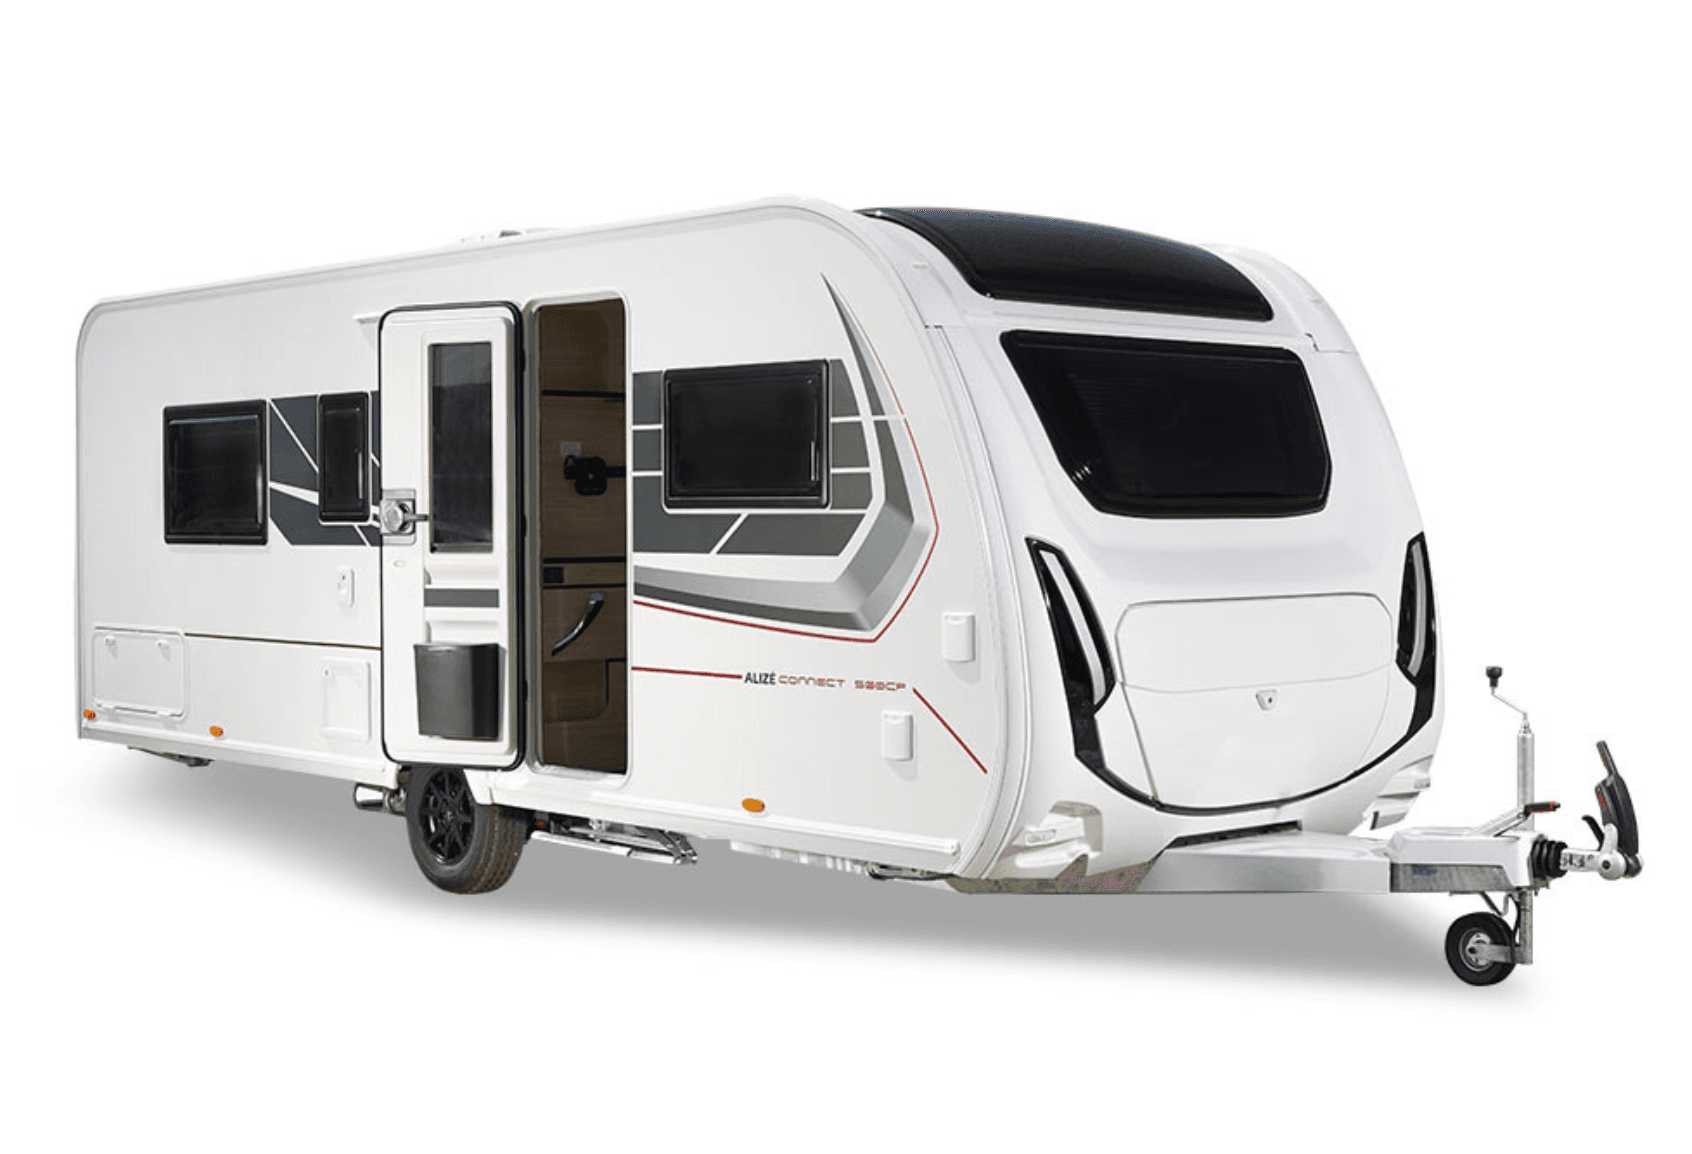 Take your home on vacation - the Alize Connect 560CP trailer – main image